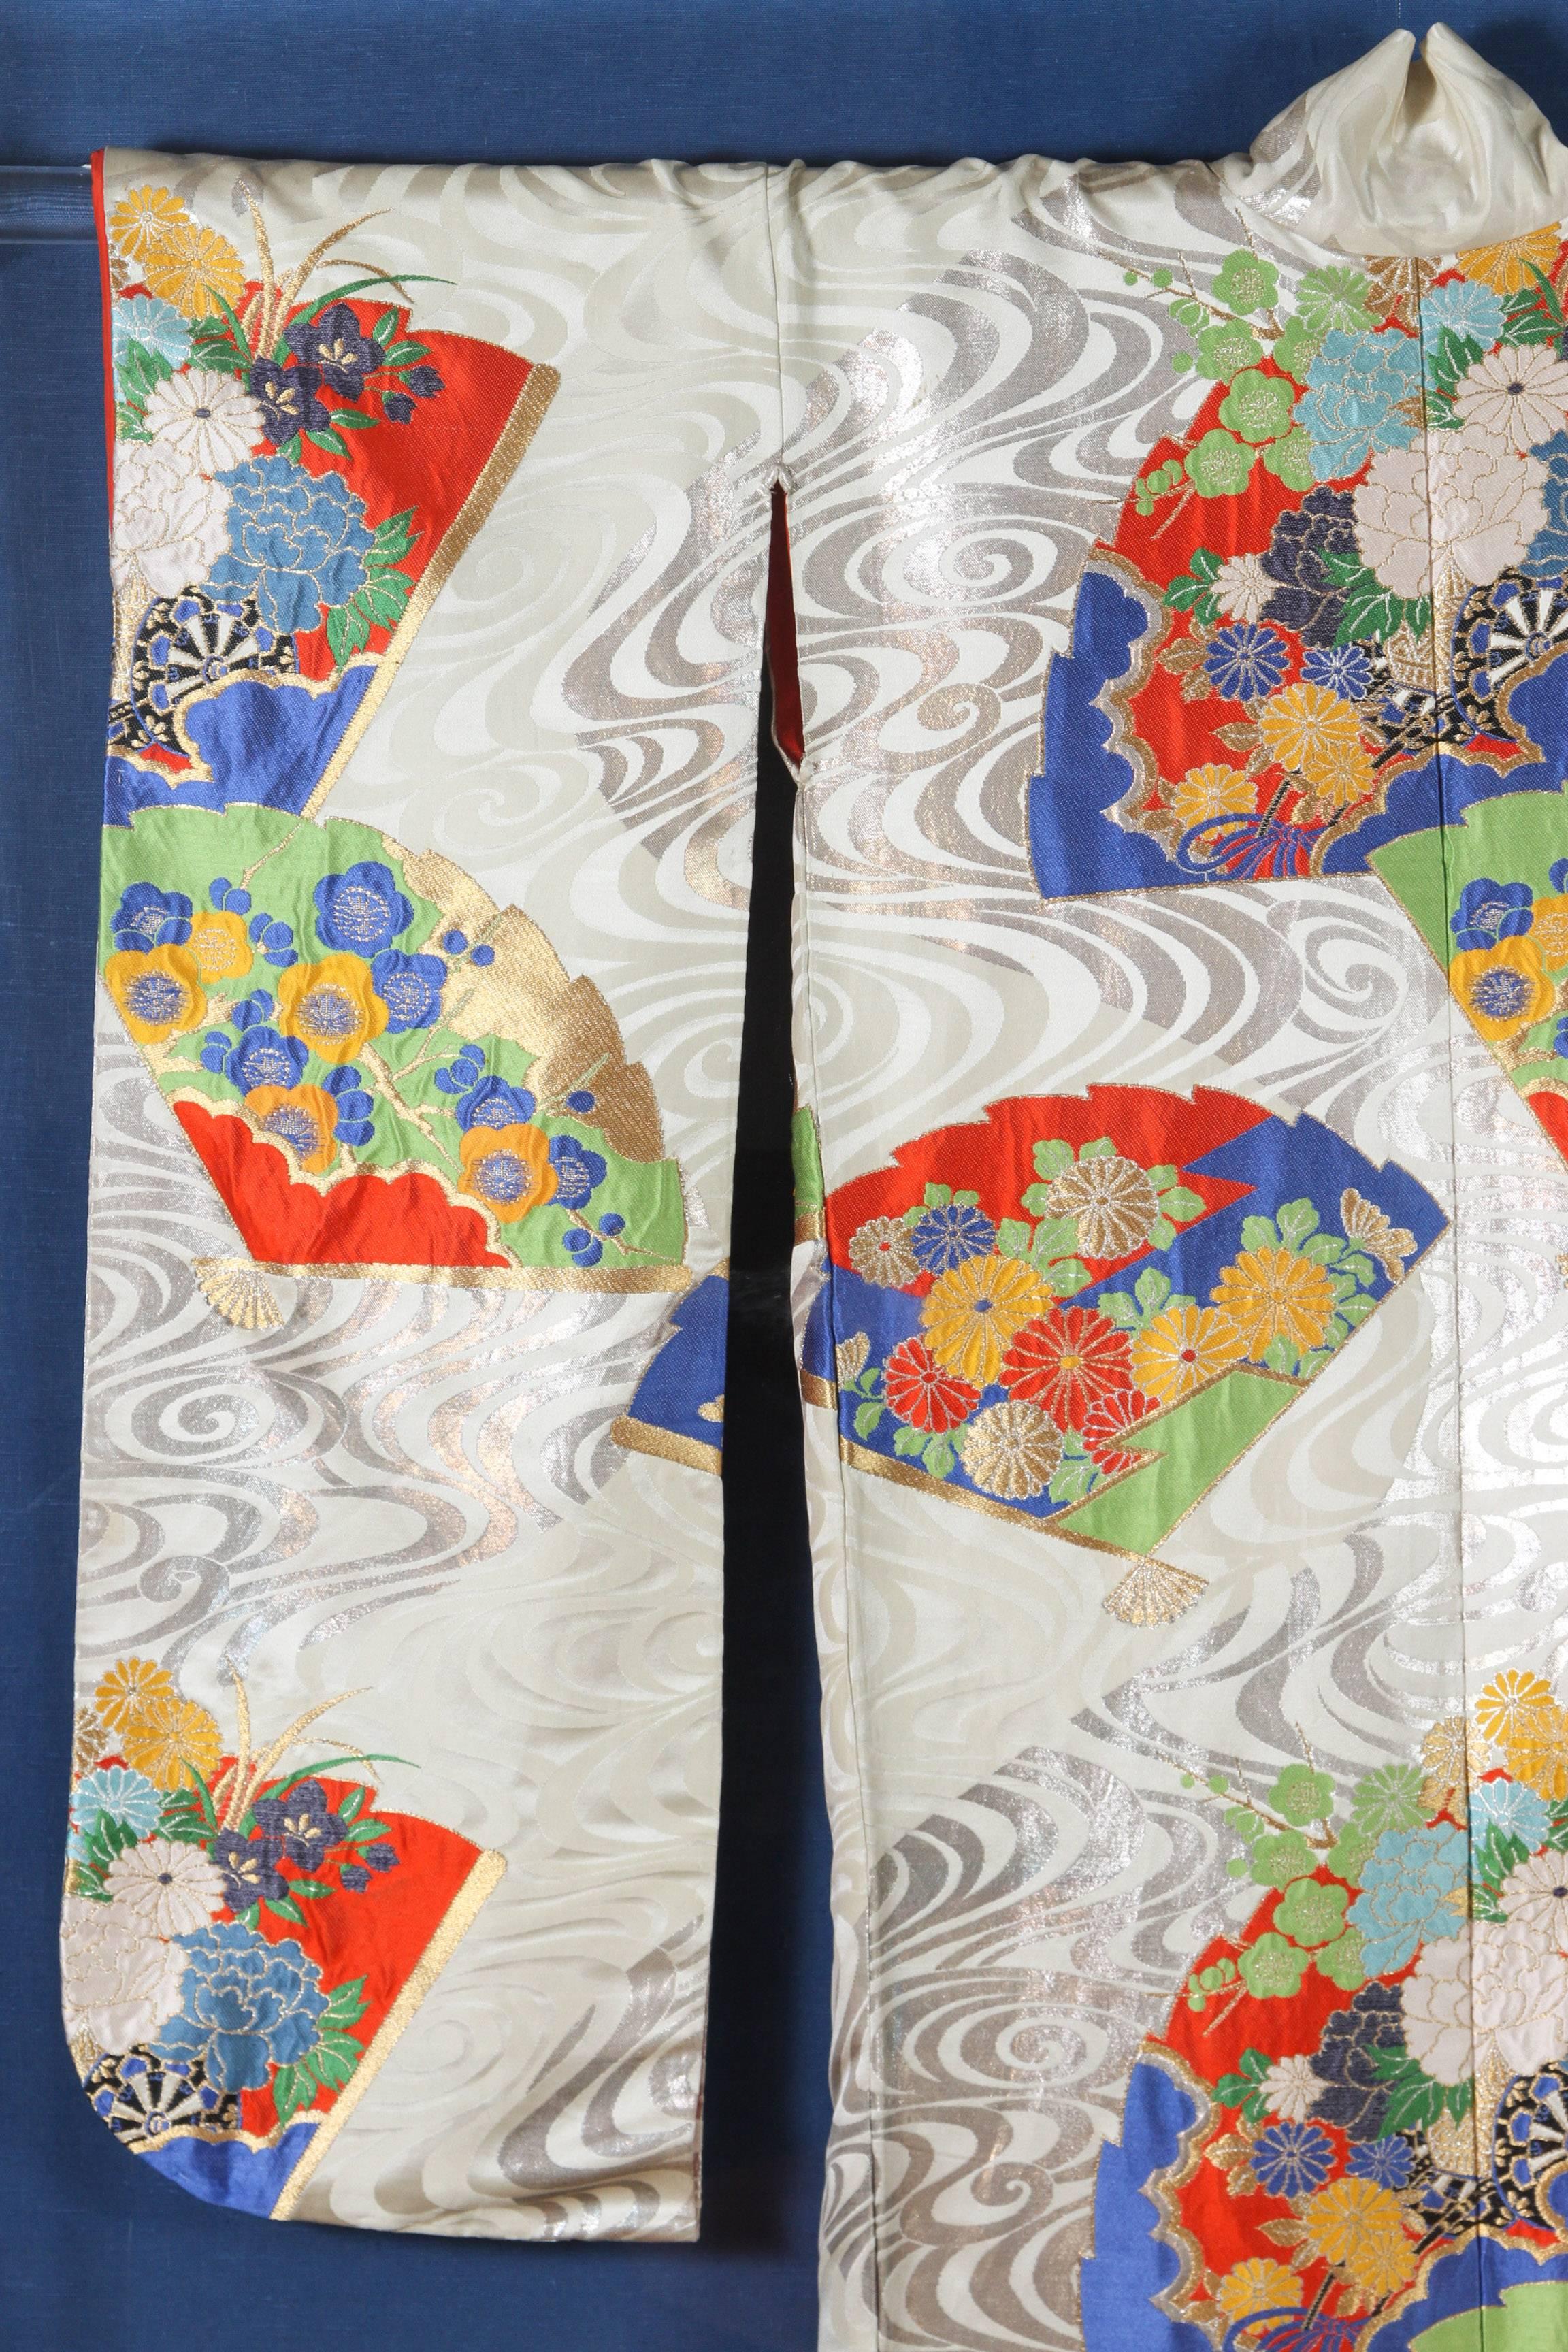 Japanese Ceremonial Kimono Framed in a Lucite box.
A vintage Japanese ceremonial kimono, circa 1940-1950, beautifully framed and displayed in a Lucite shadow box on blue background. 
An handcrafted unusual white, red and blue ceremonial piece in